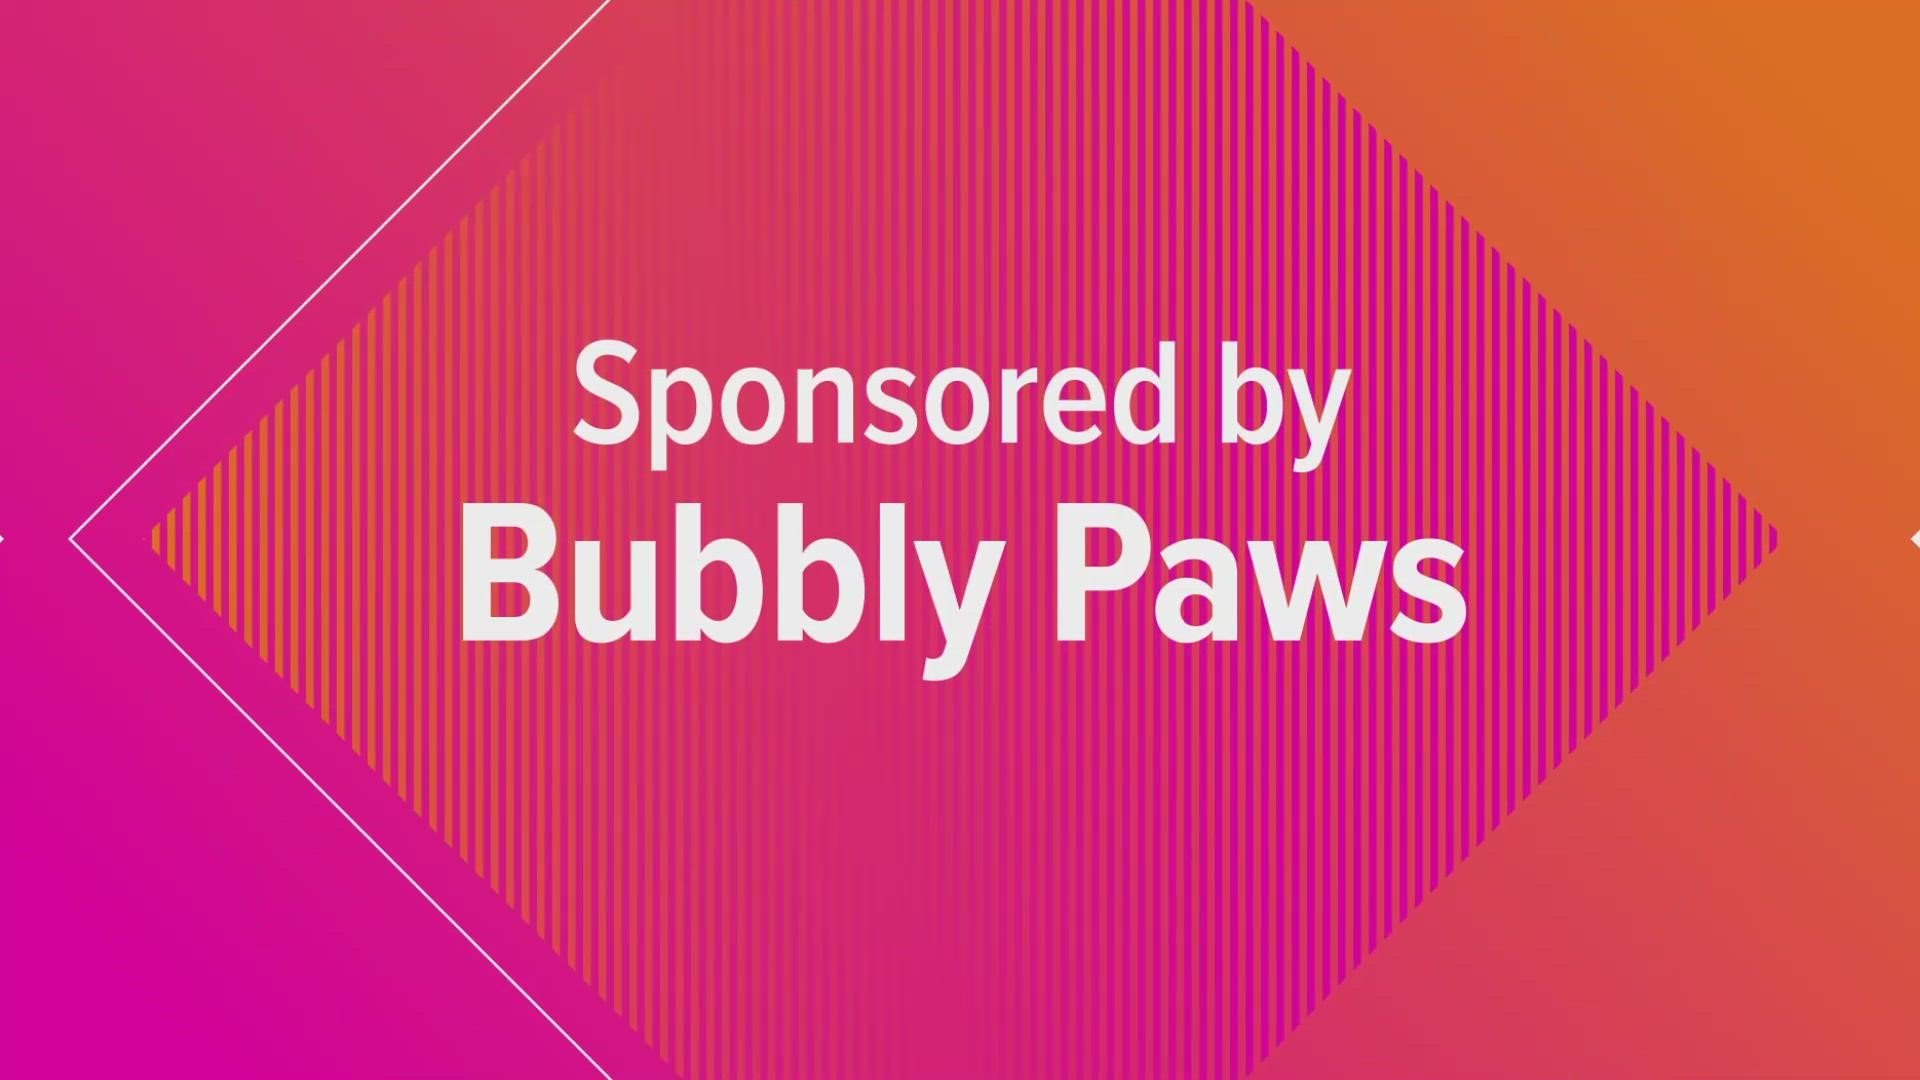 Sponsored by Bubbly Paws. Visit ktvb.com for coupon, expires March 31, 2022.